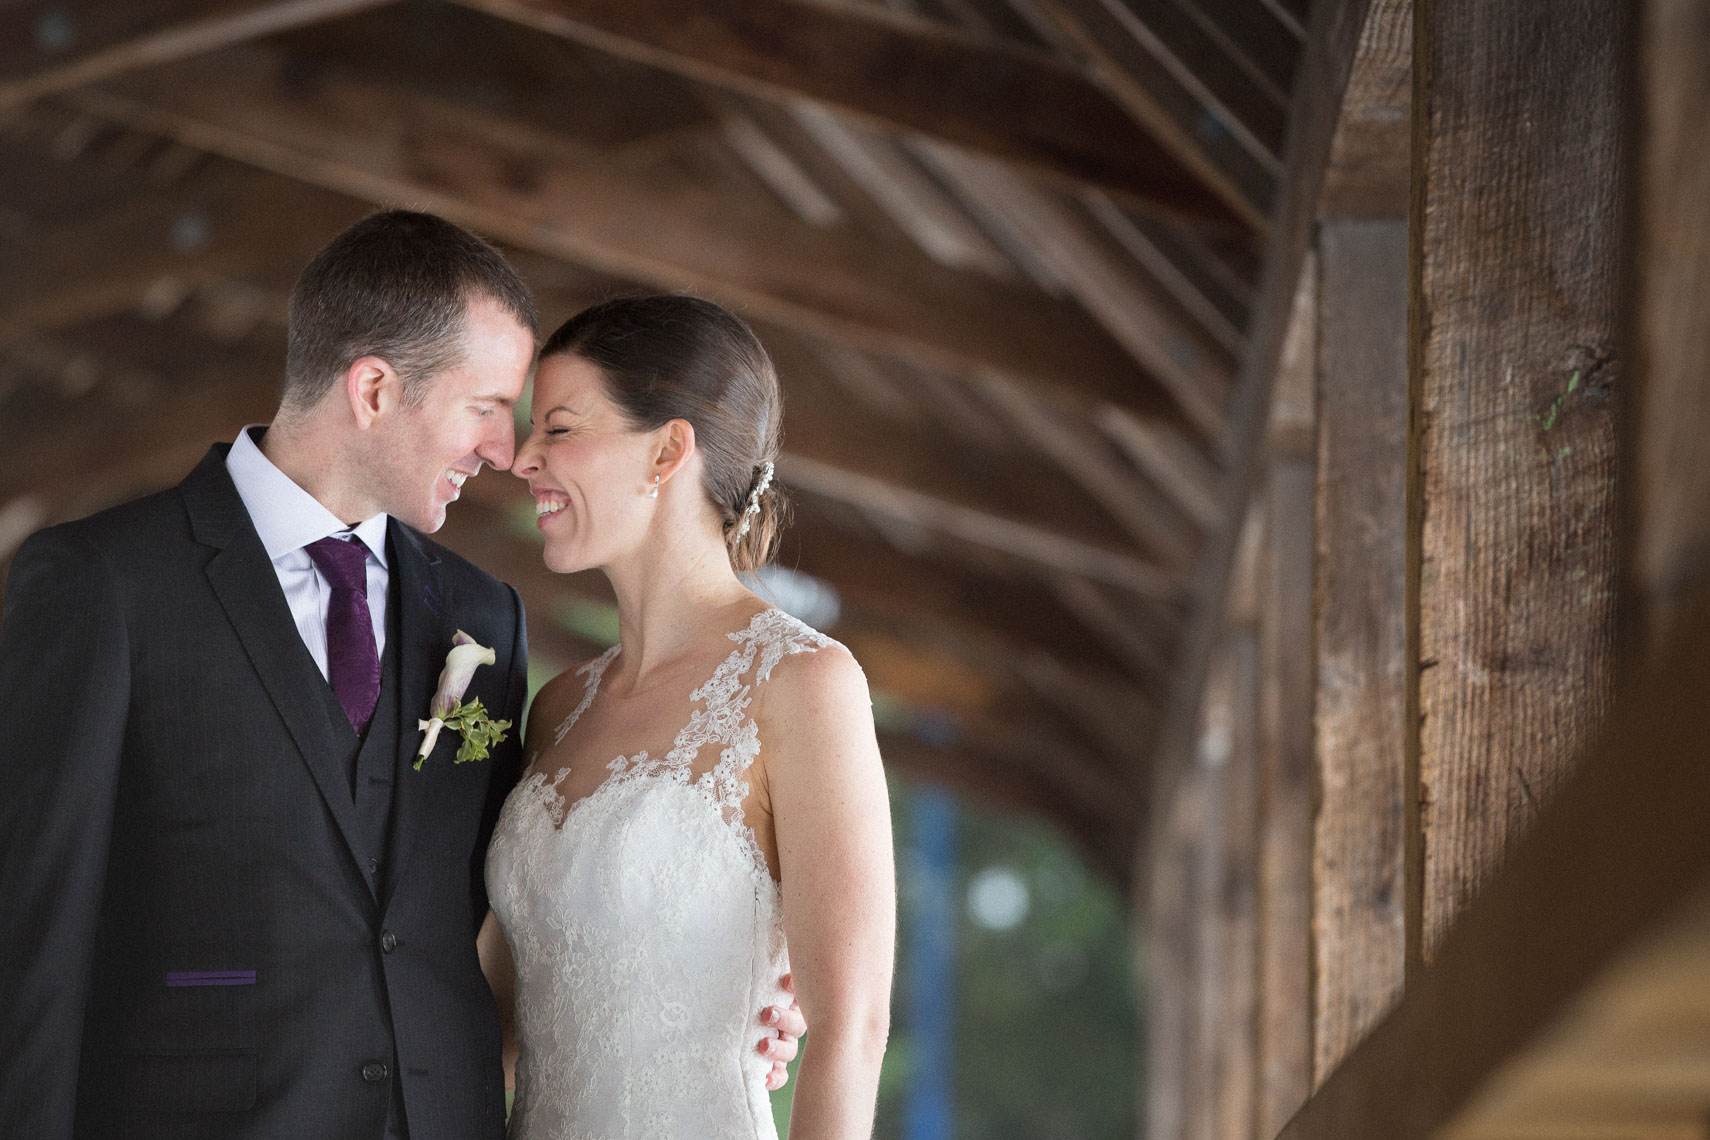 Candid moment between bride and groom on wooden covered bridge in Whistler BC